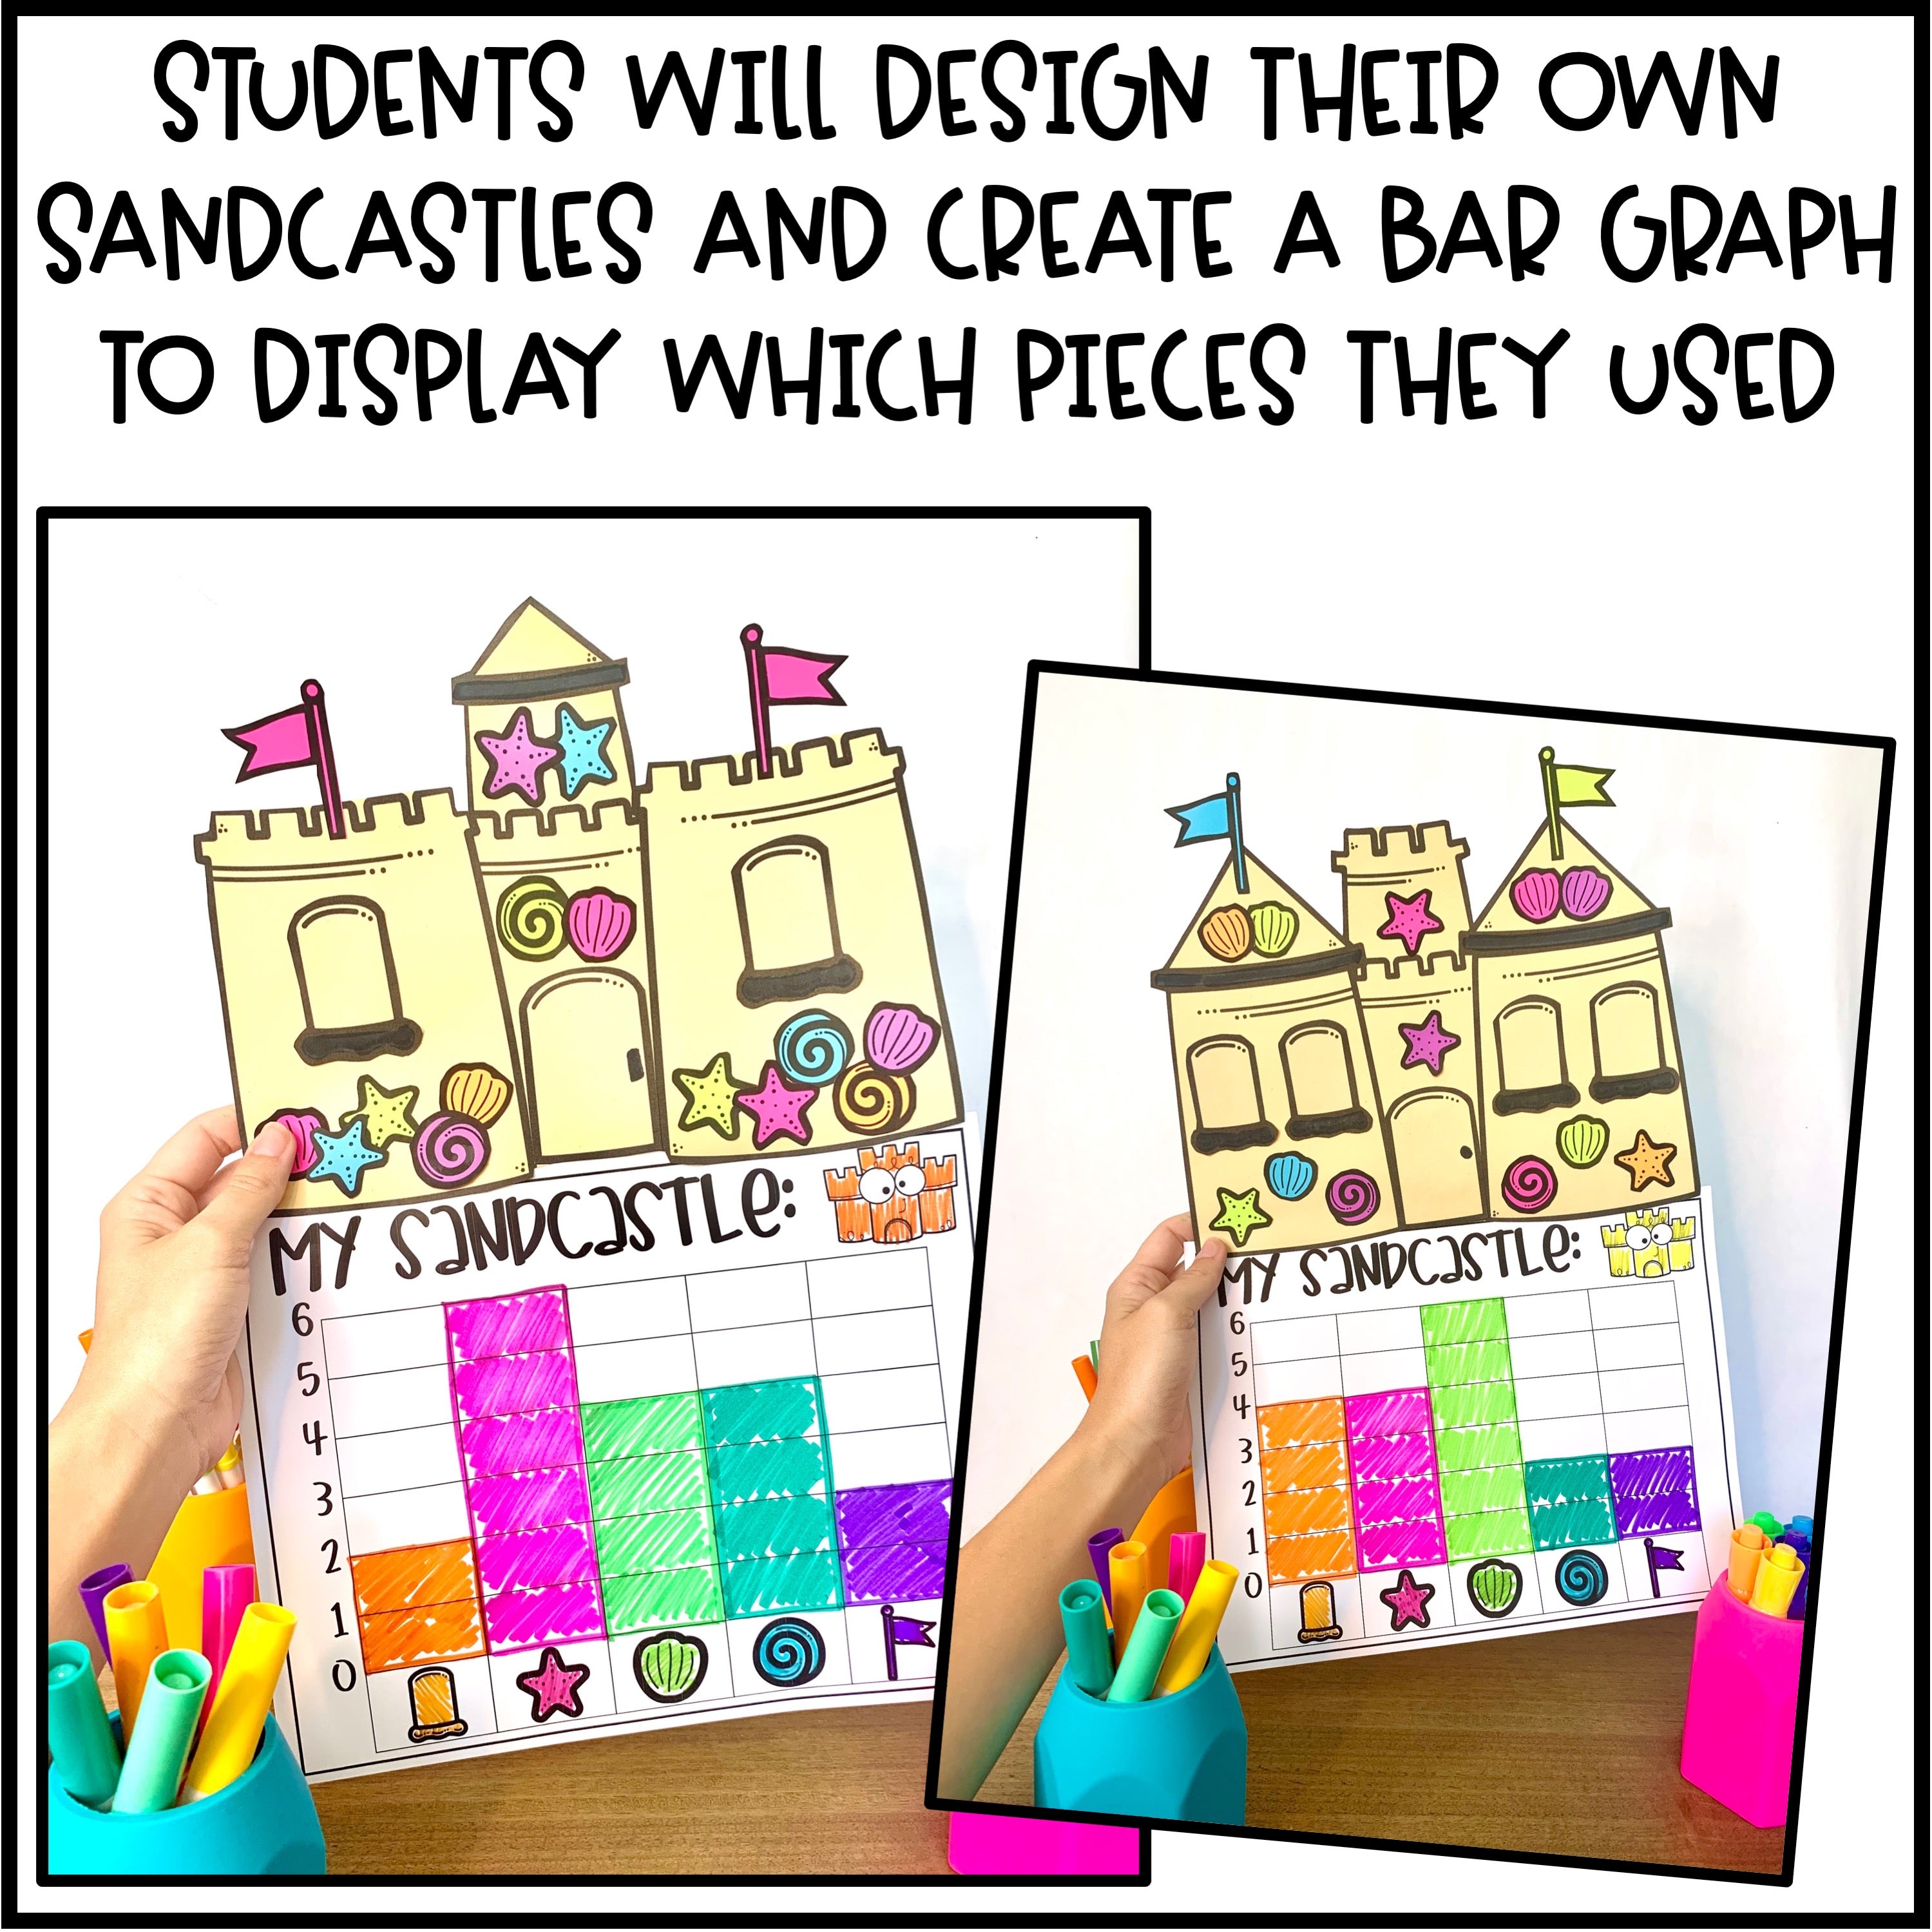 Graphing Math Craft for Bar Graphs – Teaching with Briana Beverly